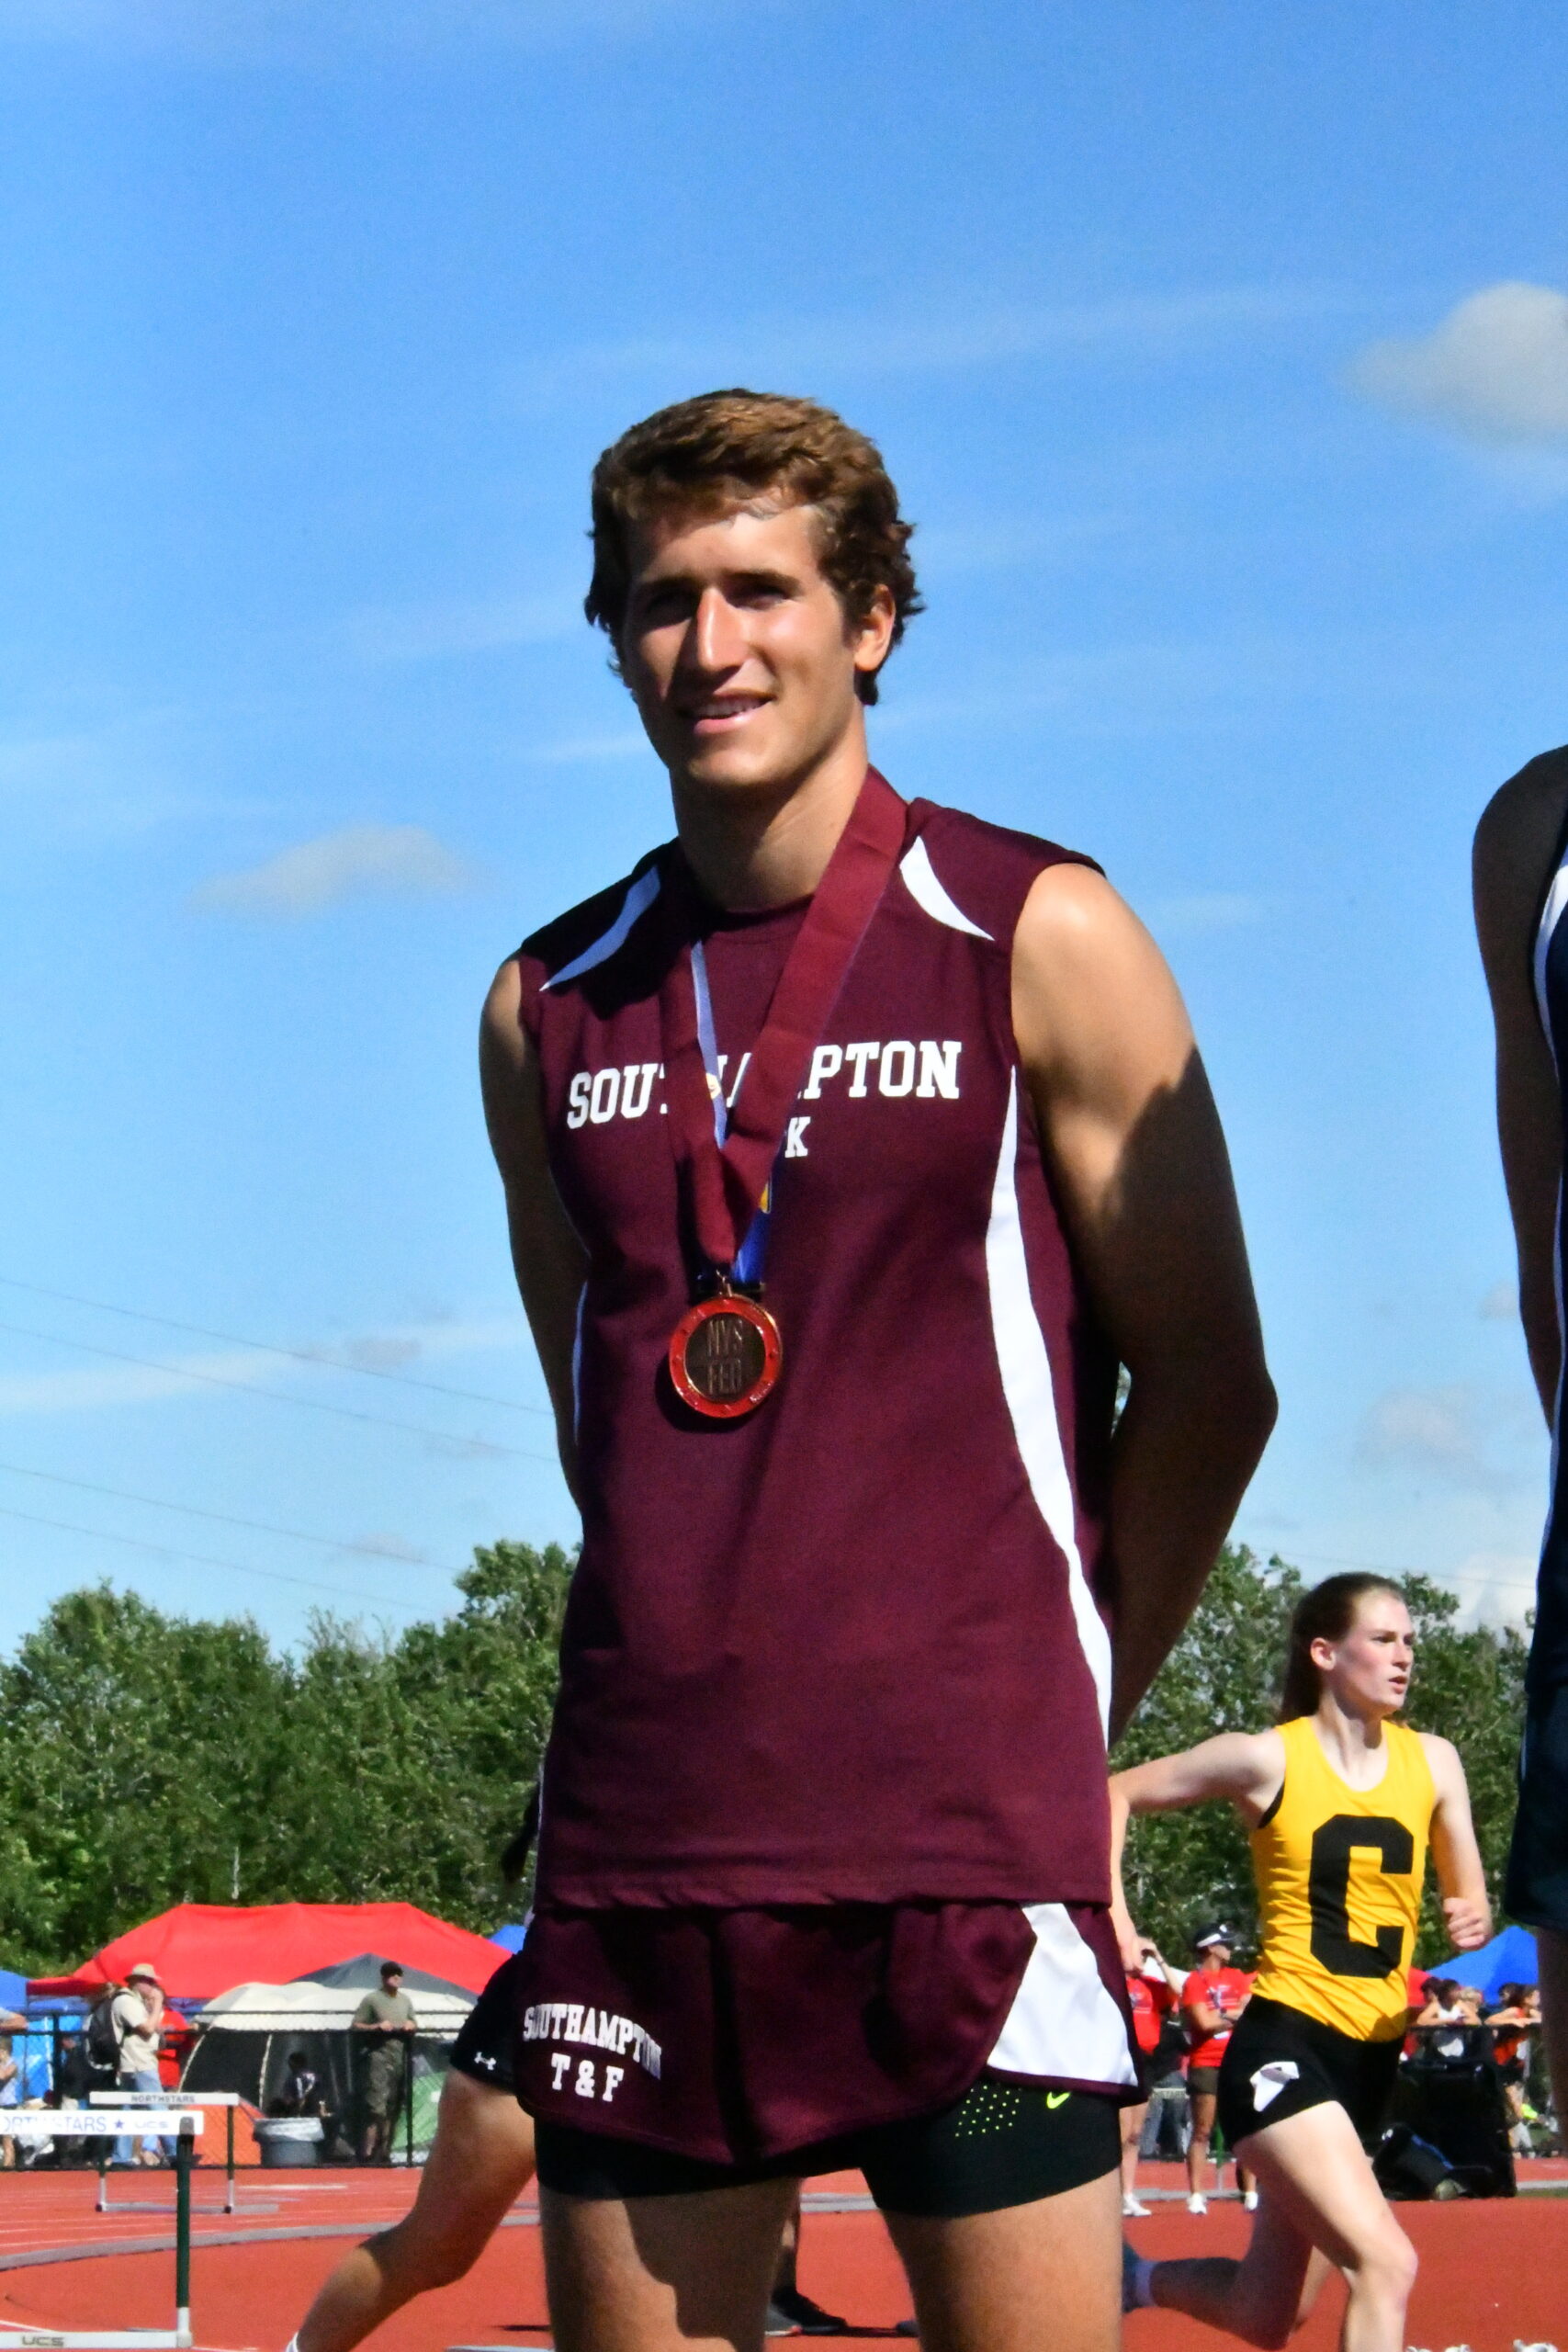 Southampton senior Billy Malone finished third among Division II (Small Schools) runners in the 800-meter race and was eighth in the Federation, earning him All-State and All-Federation Honors at the New York State Track and Field Championships at Cicero North Syracuse High School on Friday, June 10. MICHELLE MALONE PHOTOS